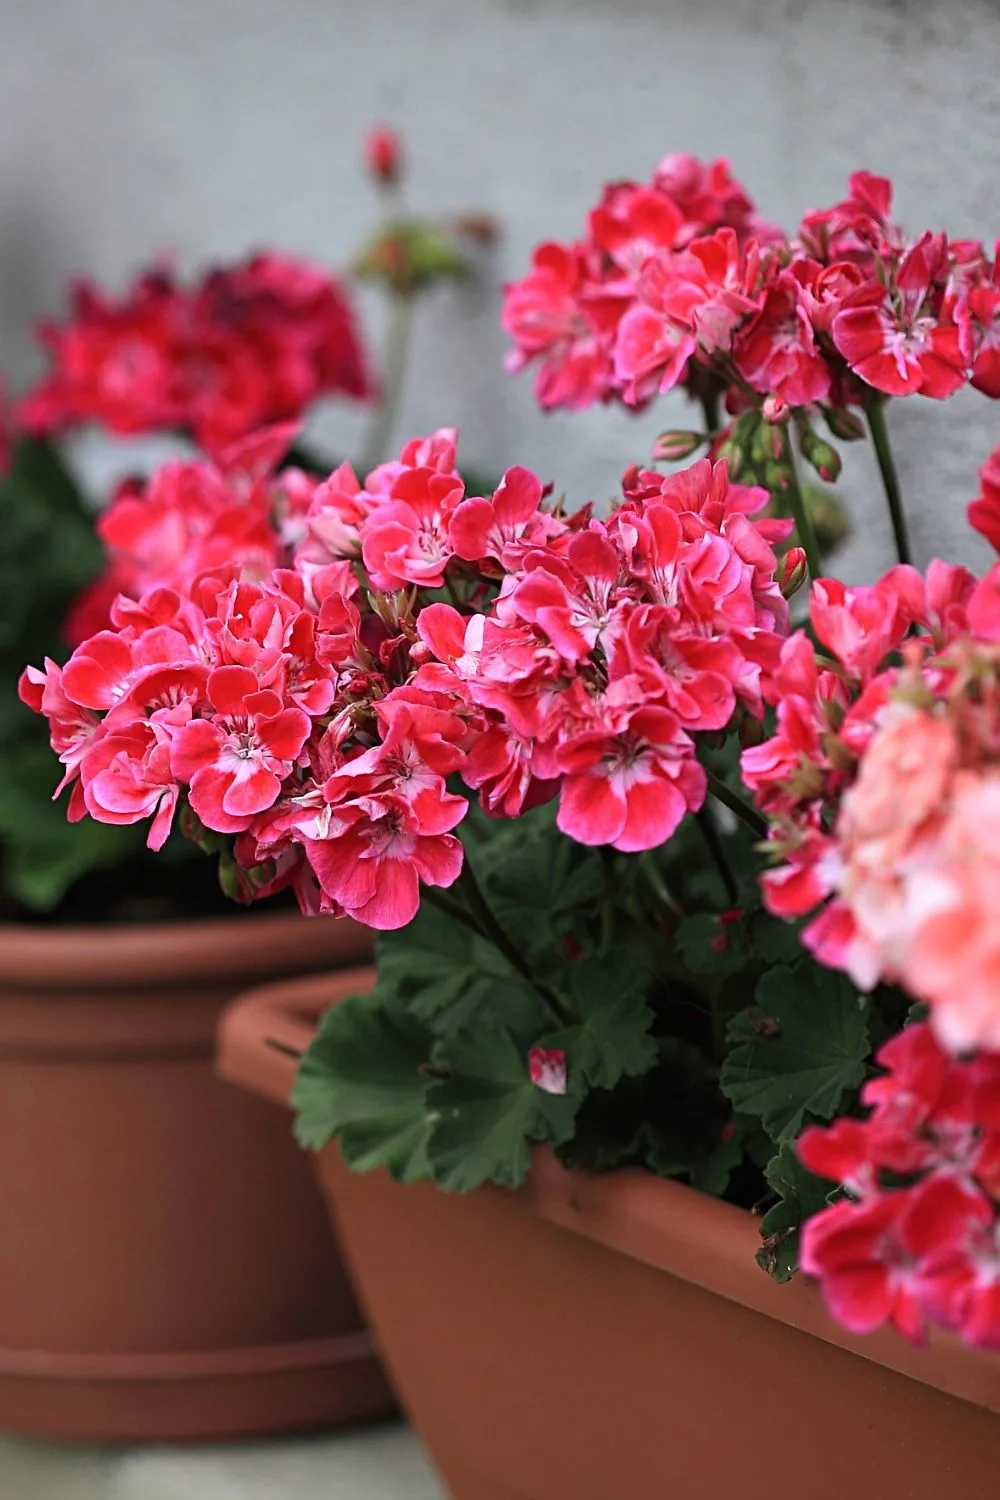 Geraniums are colorful flowers that you can grow on an east-facing balcony